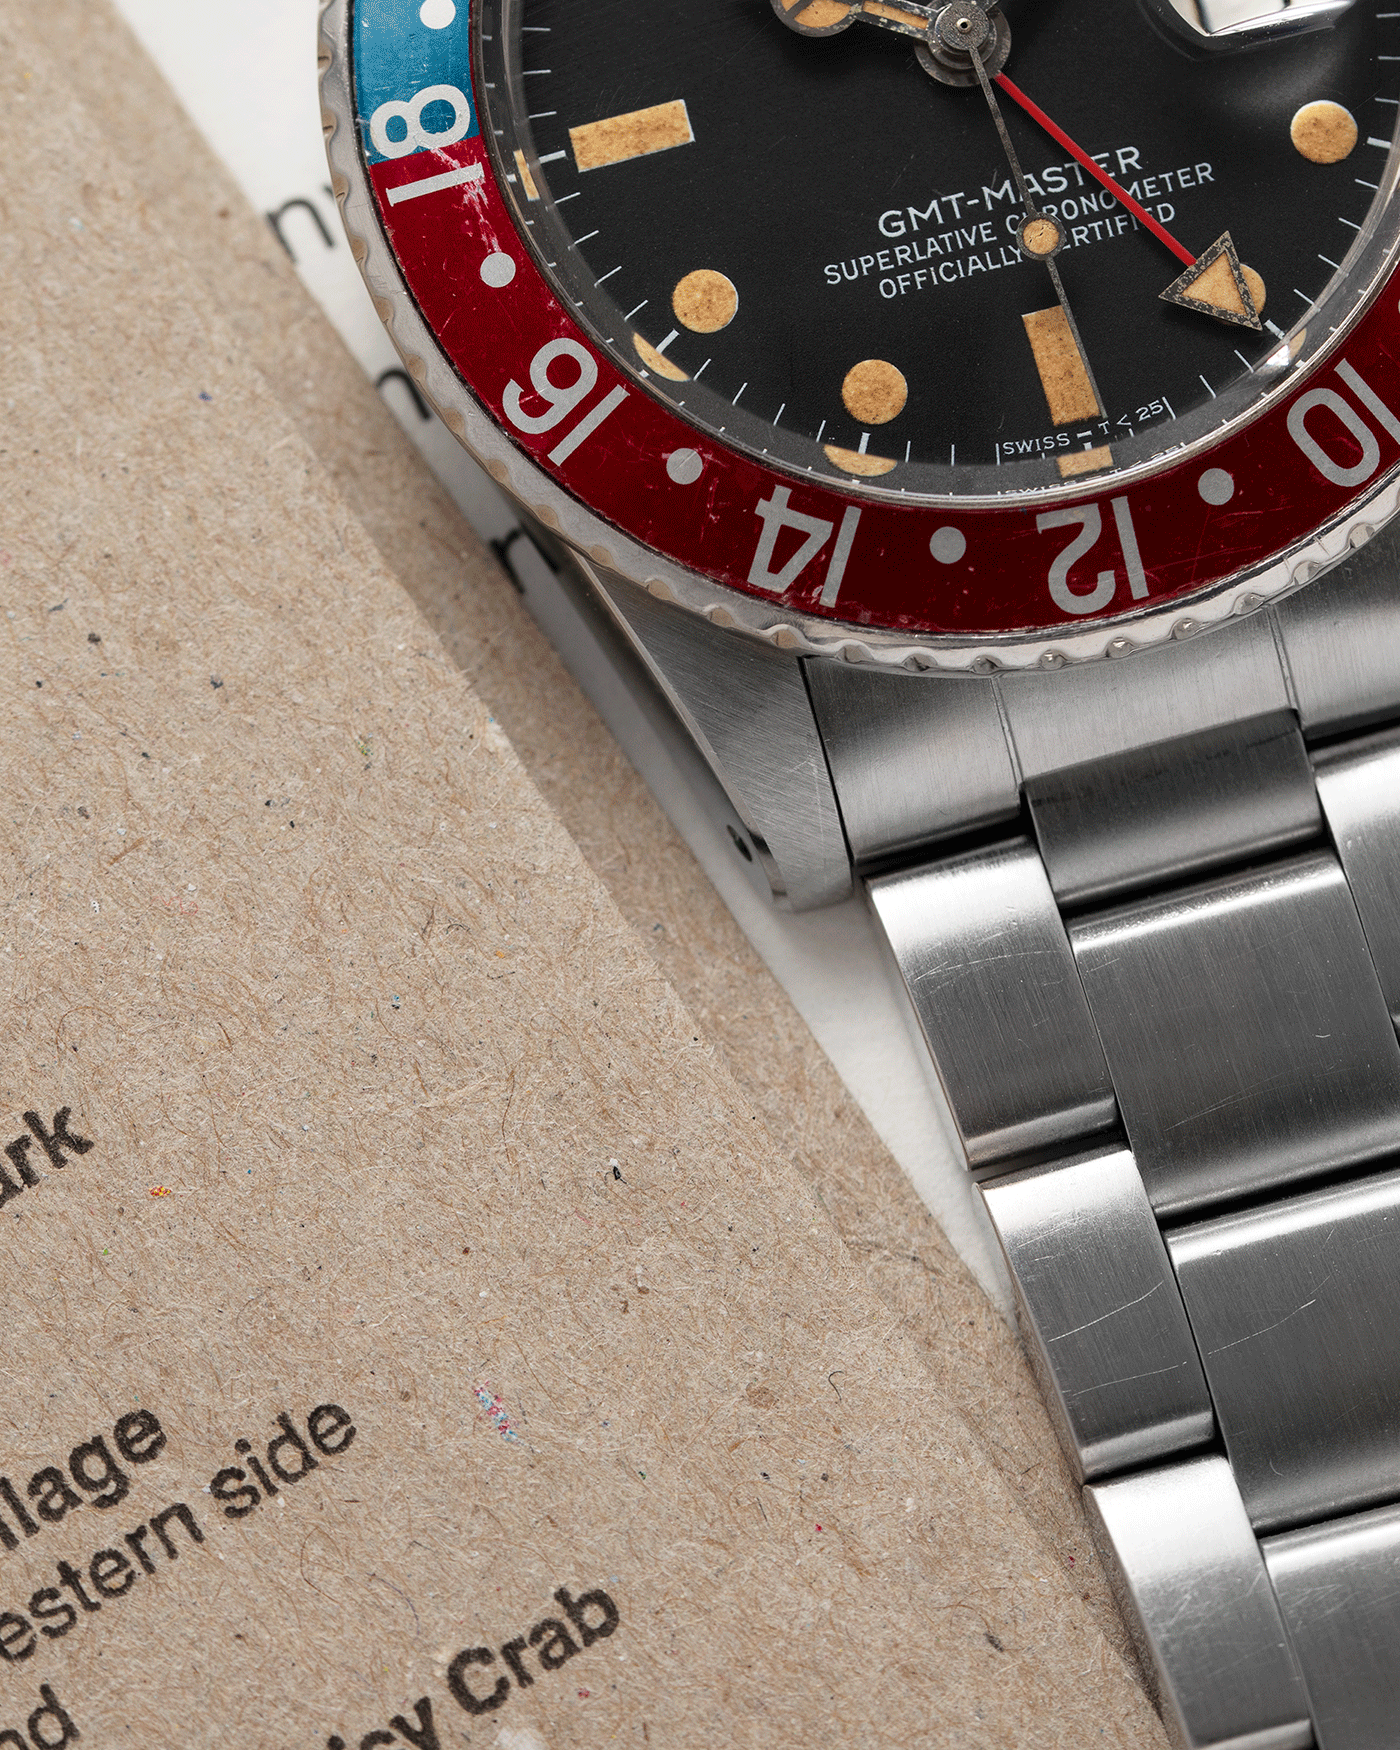 Brand: Rolex Year: 1977 Model: GMT-Master Reference Number: 1675 Serial Number: 519XXXX Material: Stainless Steel Movement: Cal. 1570 Case Diameter: 40mm Lug Width: 20mm Bracelet: Rolex 78360 Heavy Oyster Bracelet with 580 Endlinks and ‘A’ Stamp